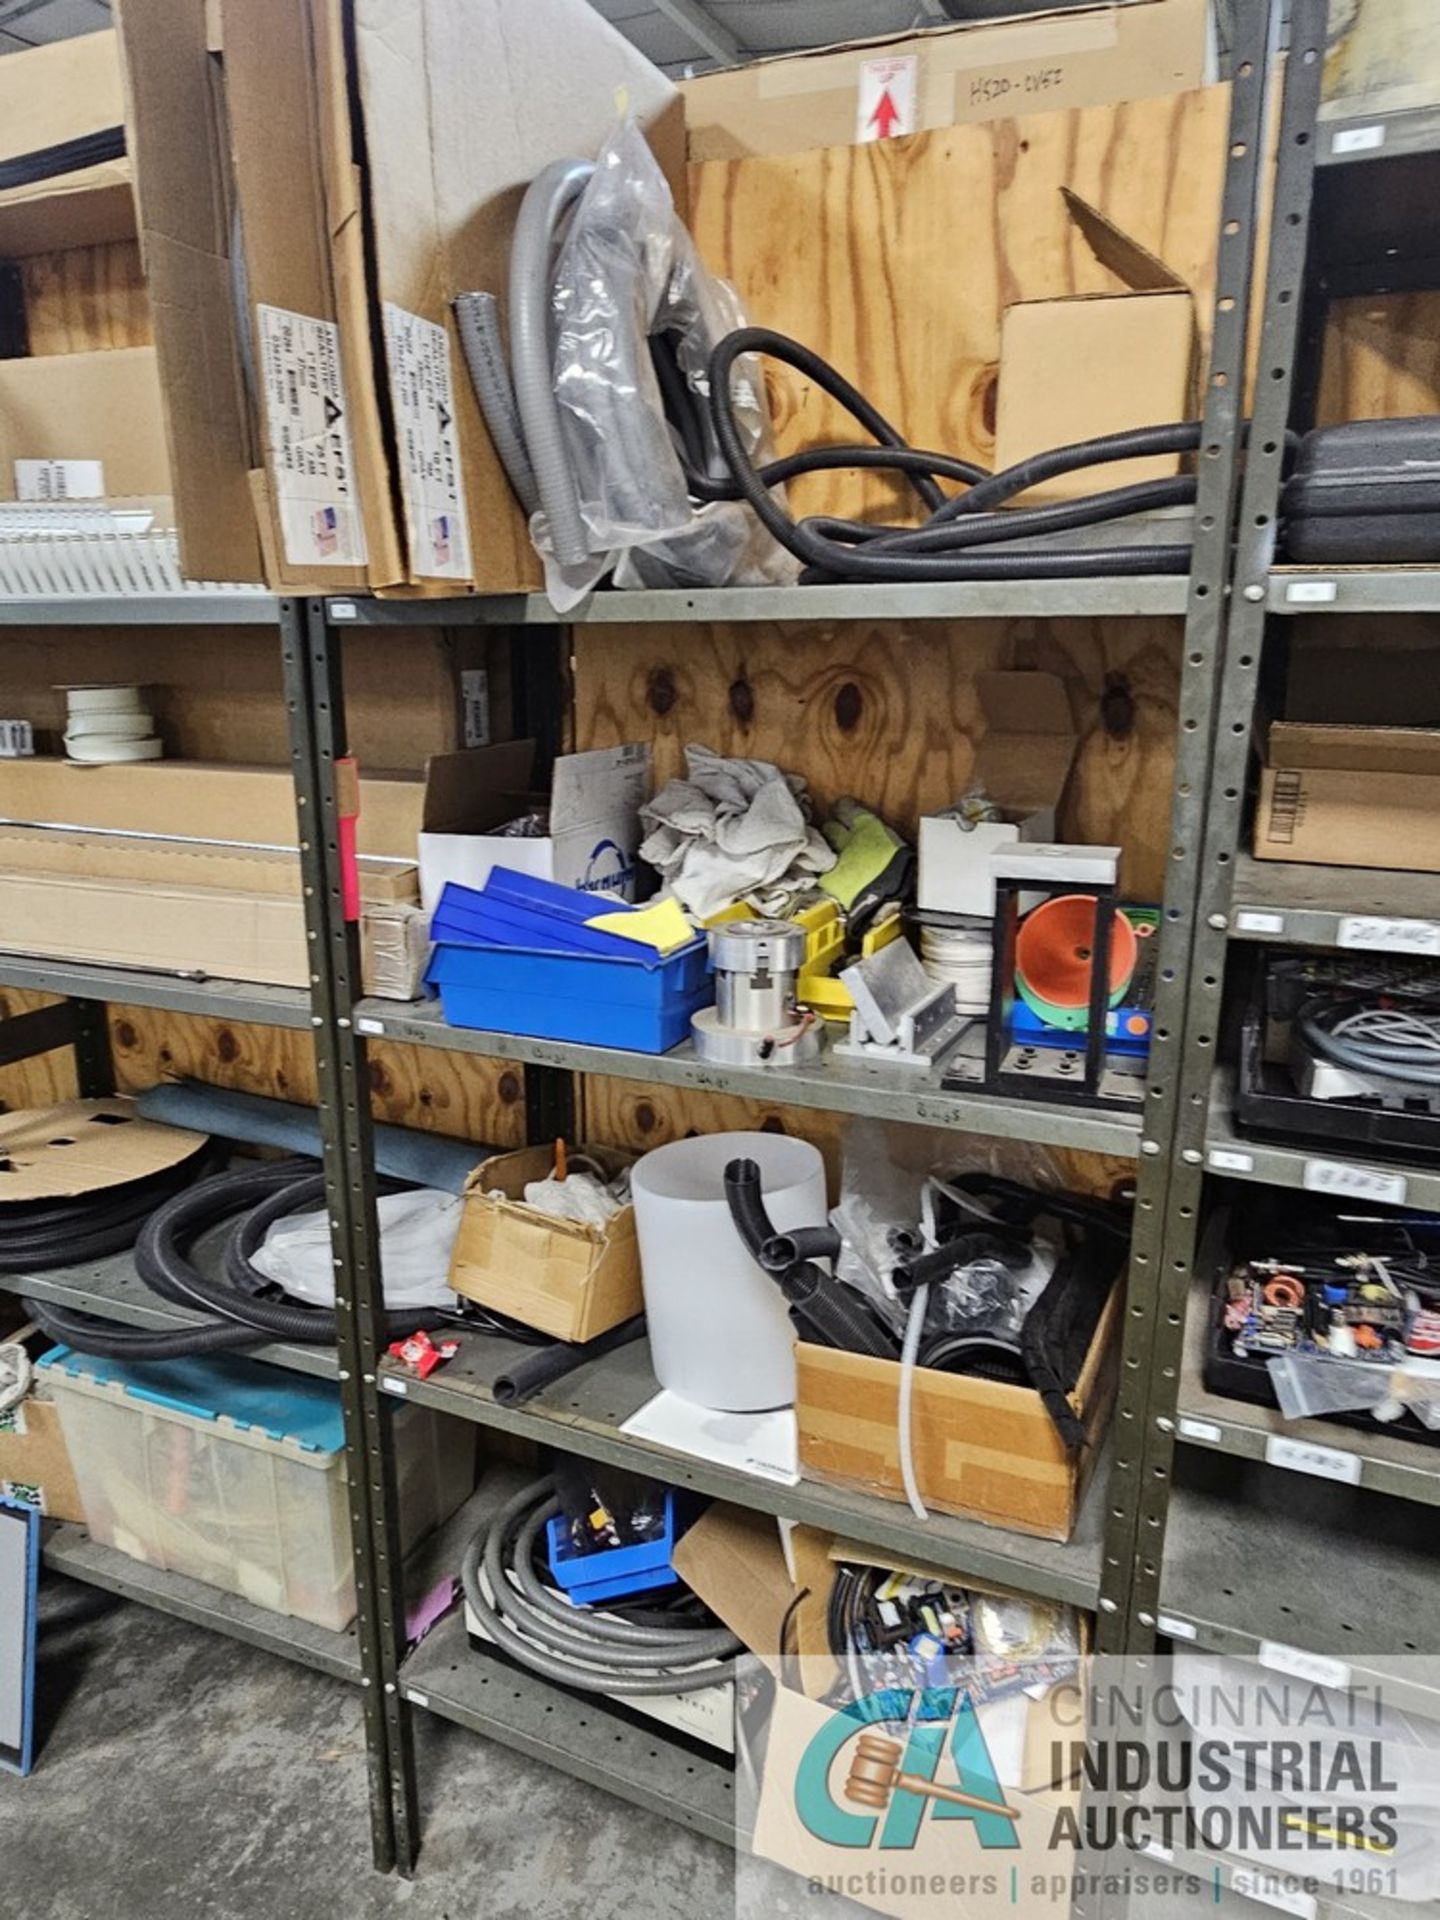 SECTIONS STEEL SHELVING WITH CONTENTS; ELECTRIC PARTS AND MISCELLANEOUS TOOLTEX ITEMS - Image 5 of 6